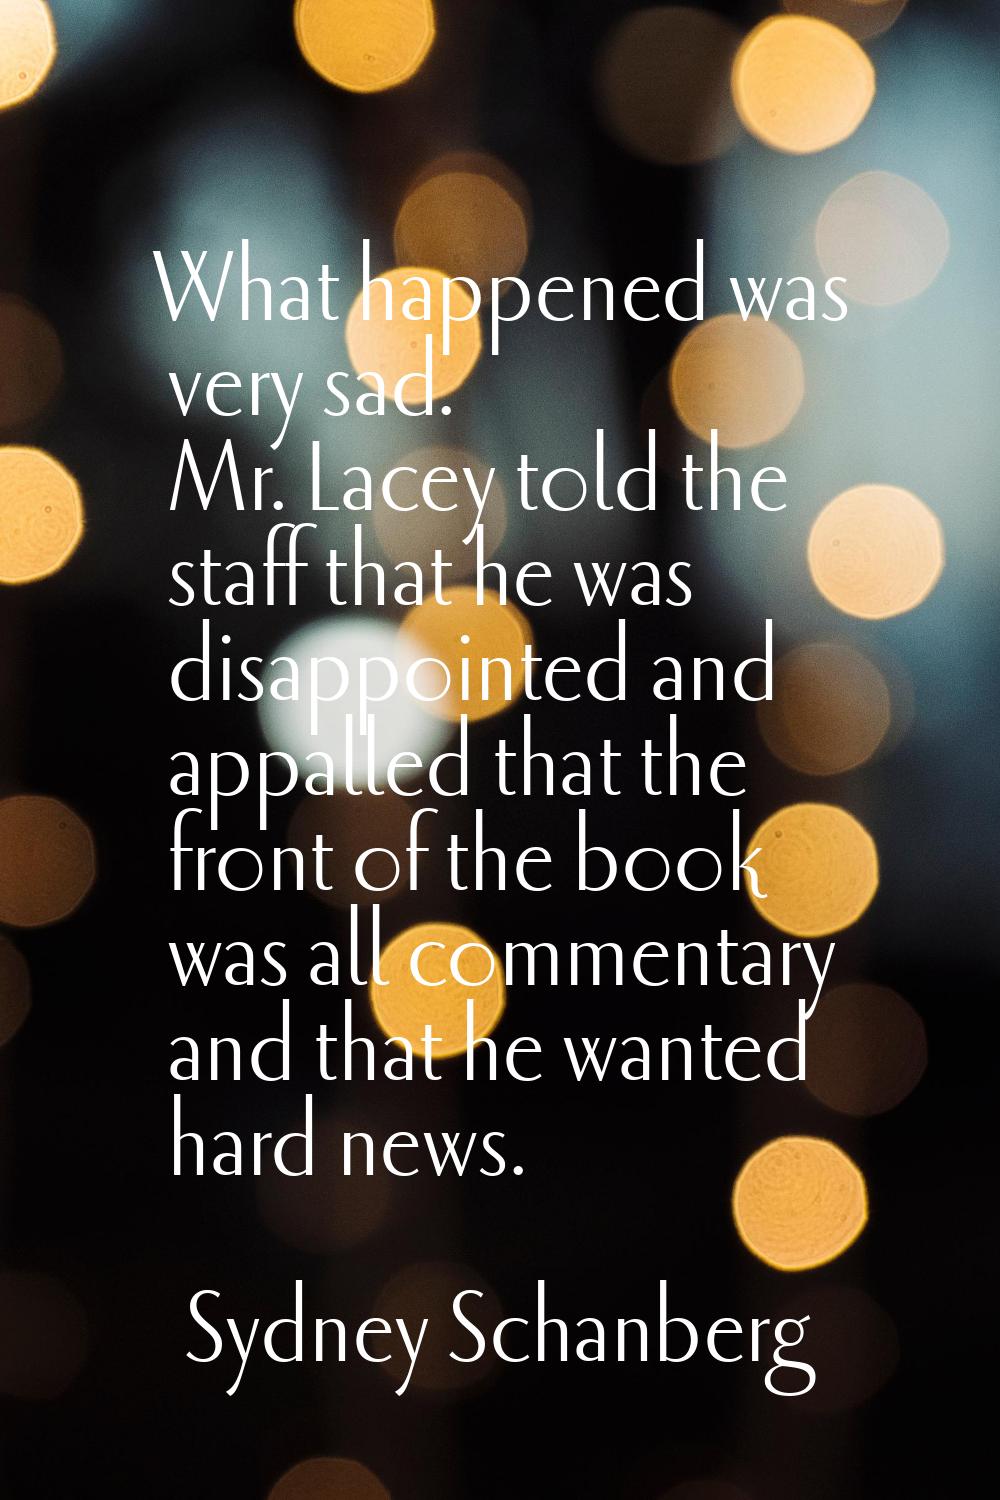 What happened was very sad. Mr. Lacey told the staff that he was disappointed and appalled that the